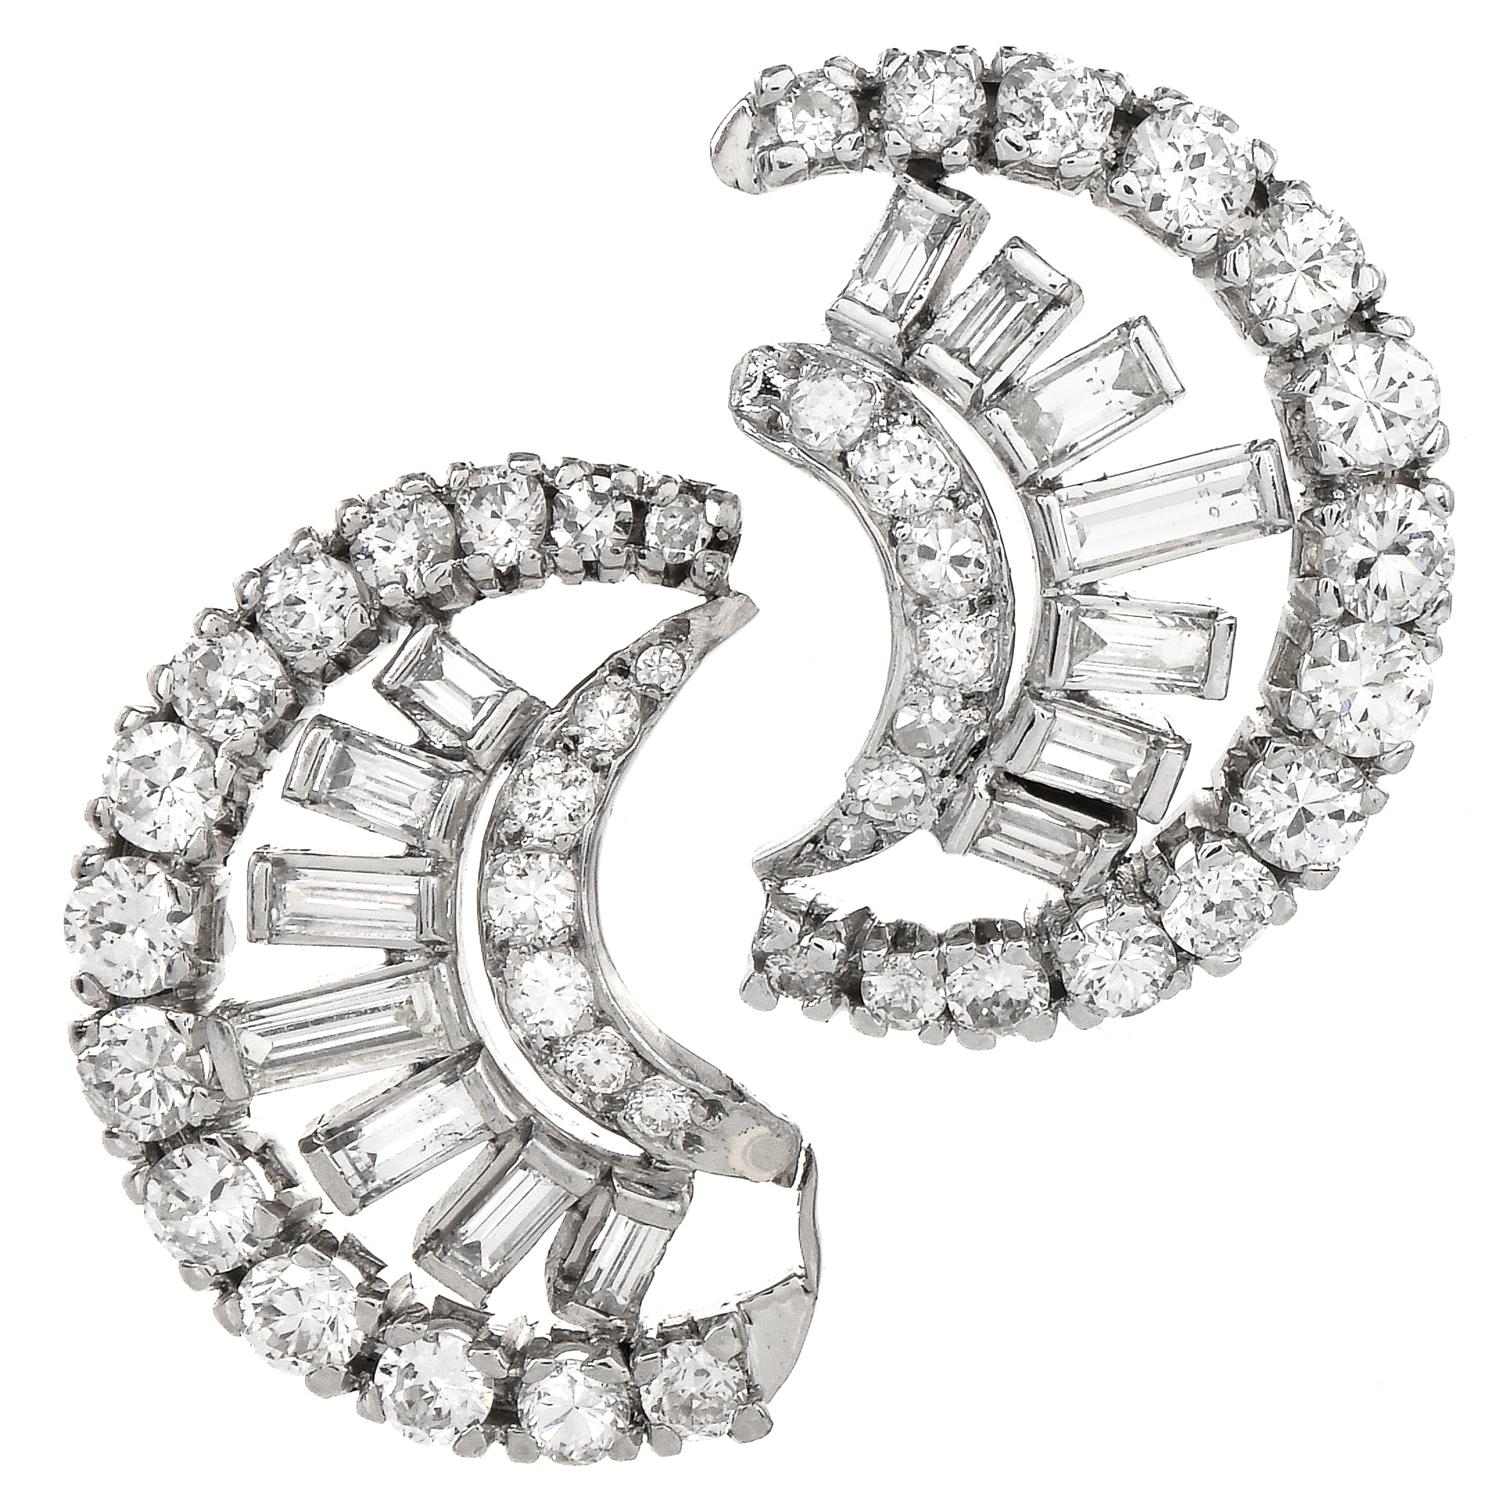 These vintage Crescent Diamond earrings are crafted in platinum, weighing approx. 17.7 grams and measuring 27mm x 18mm wide.  The earrings are covered with graduated round baguette-cut prong-set natural diamonds  These variously cut